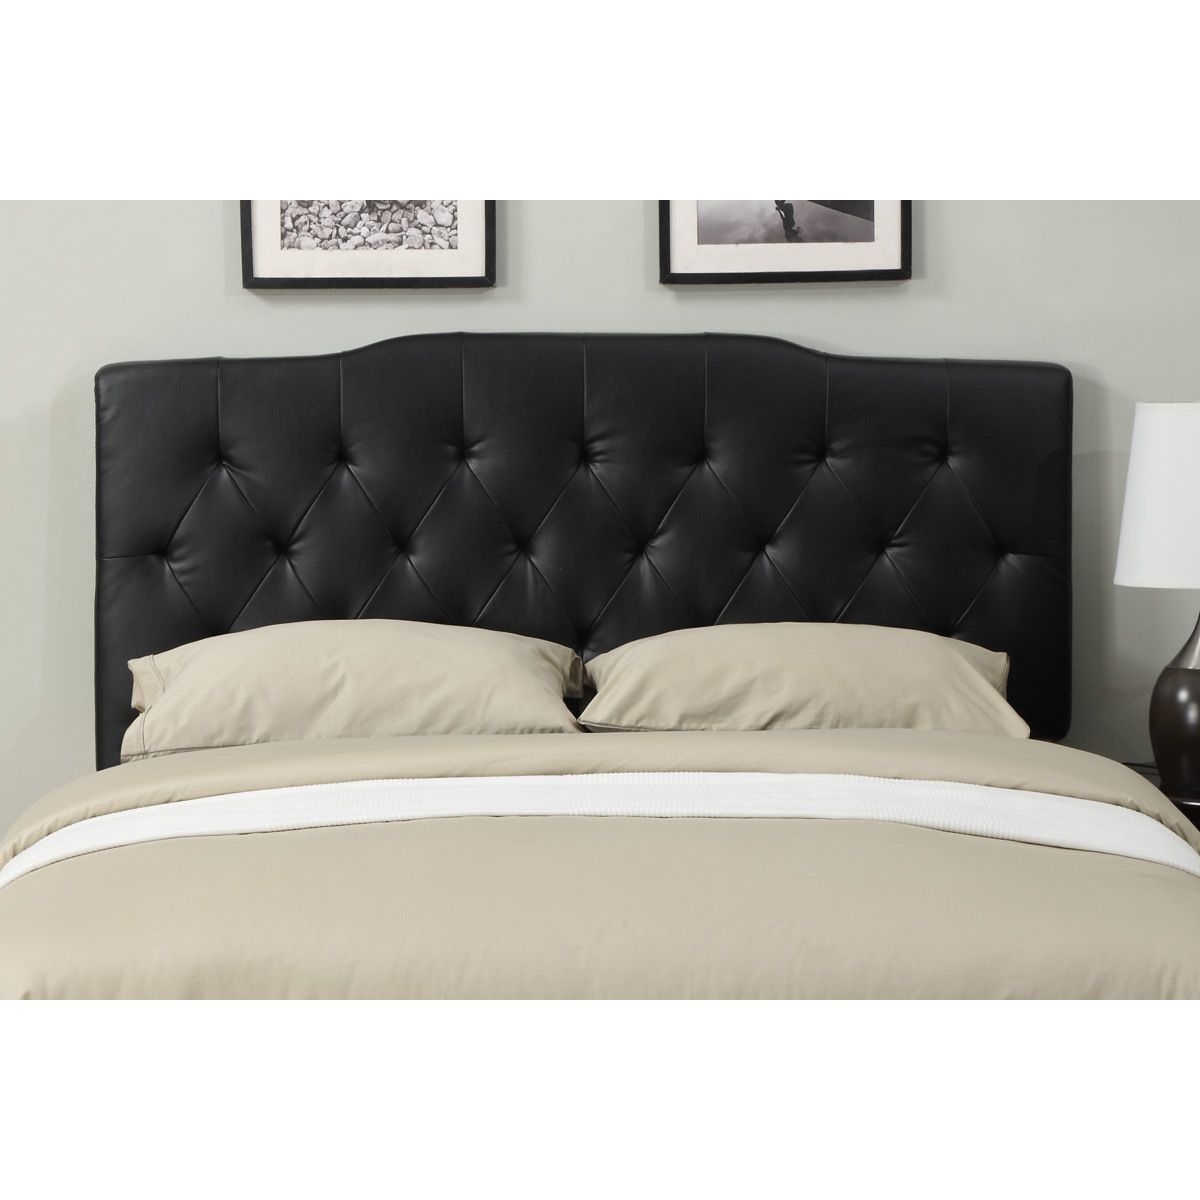 Black Leather Full Queen Size Tufted Headboard